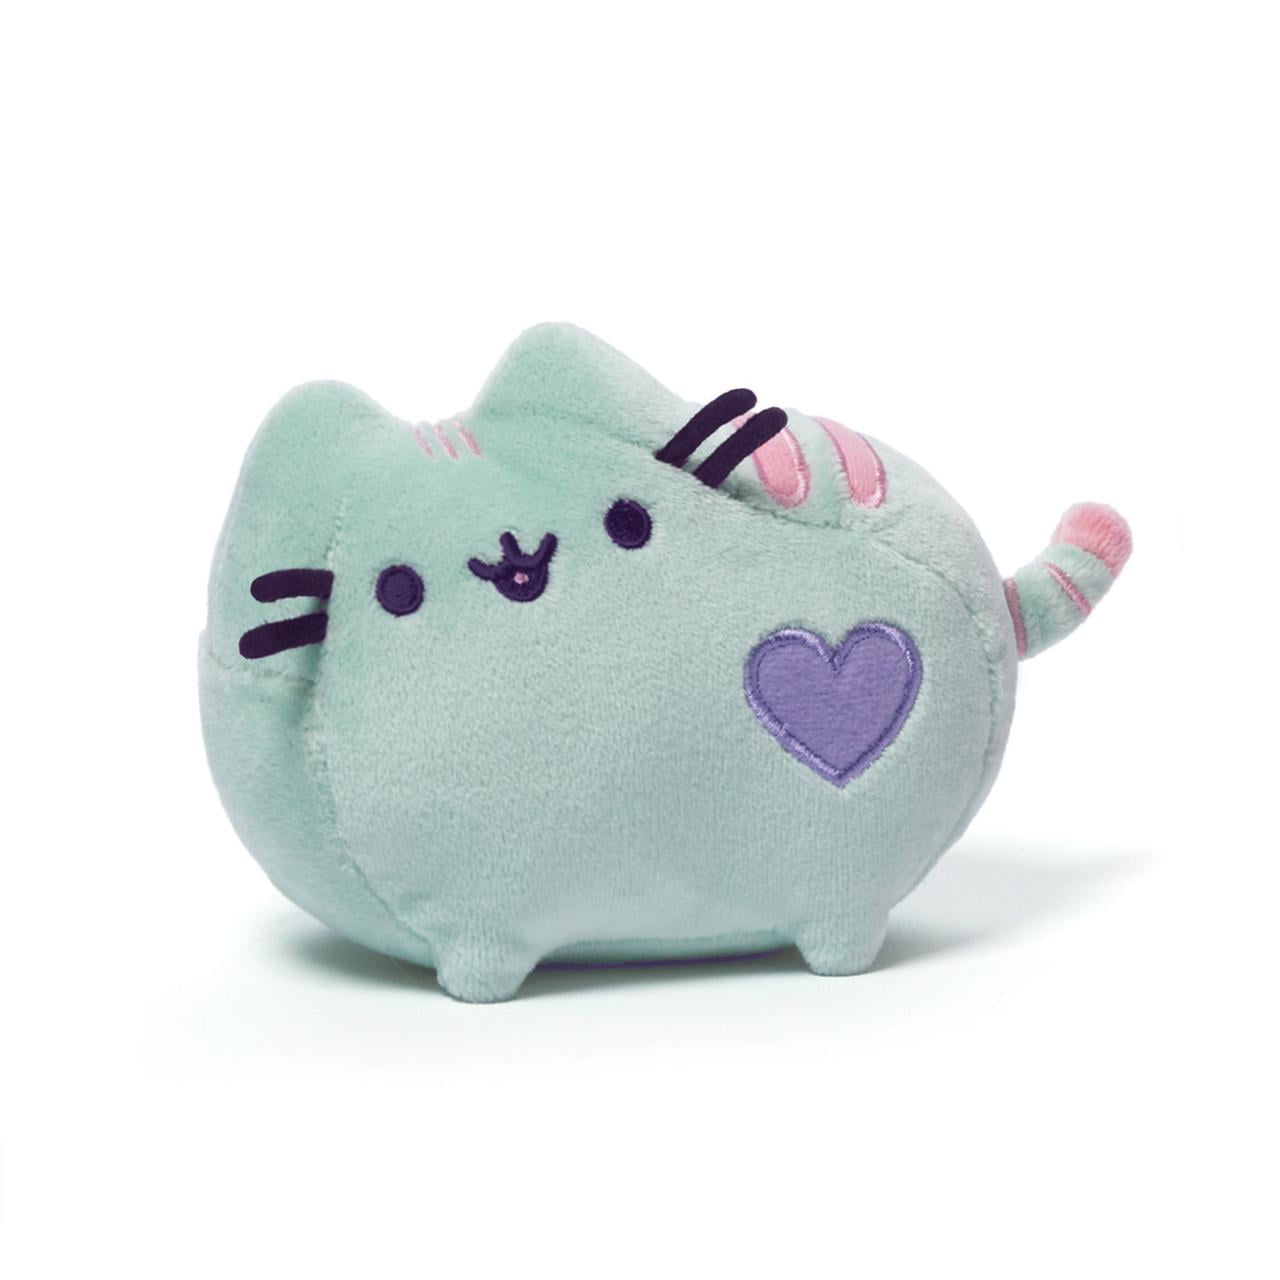 GUND Pusheen Cat Plush Stuffed Animal 6 Inches 028399069330 for sale online 